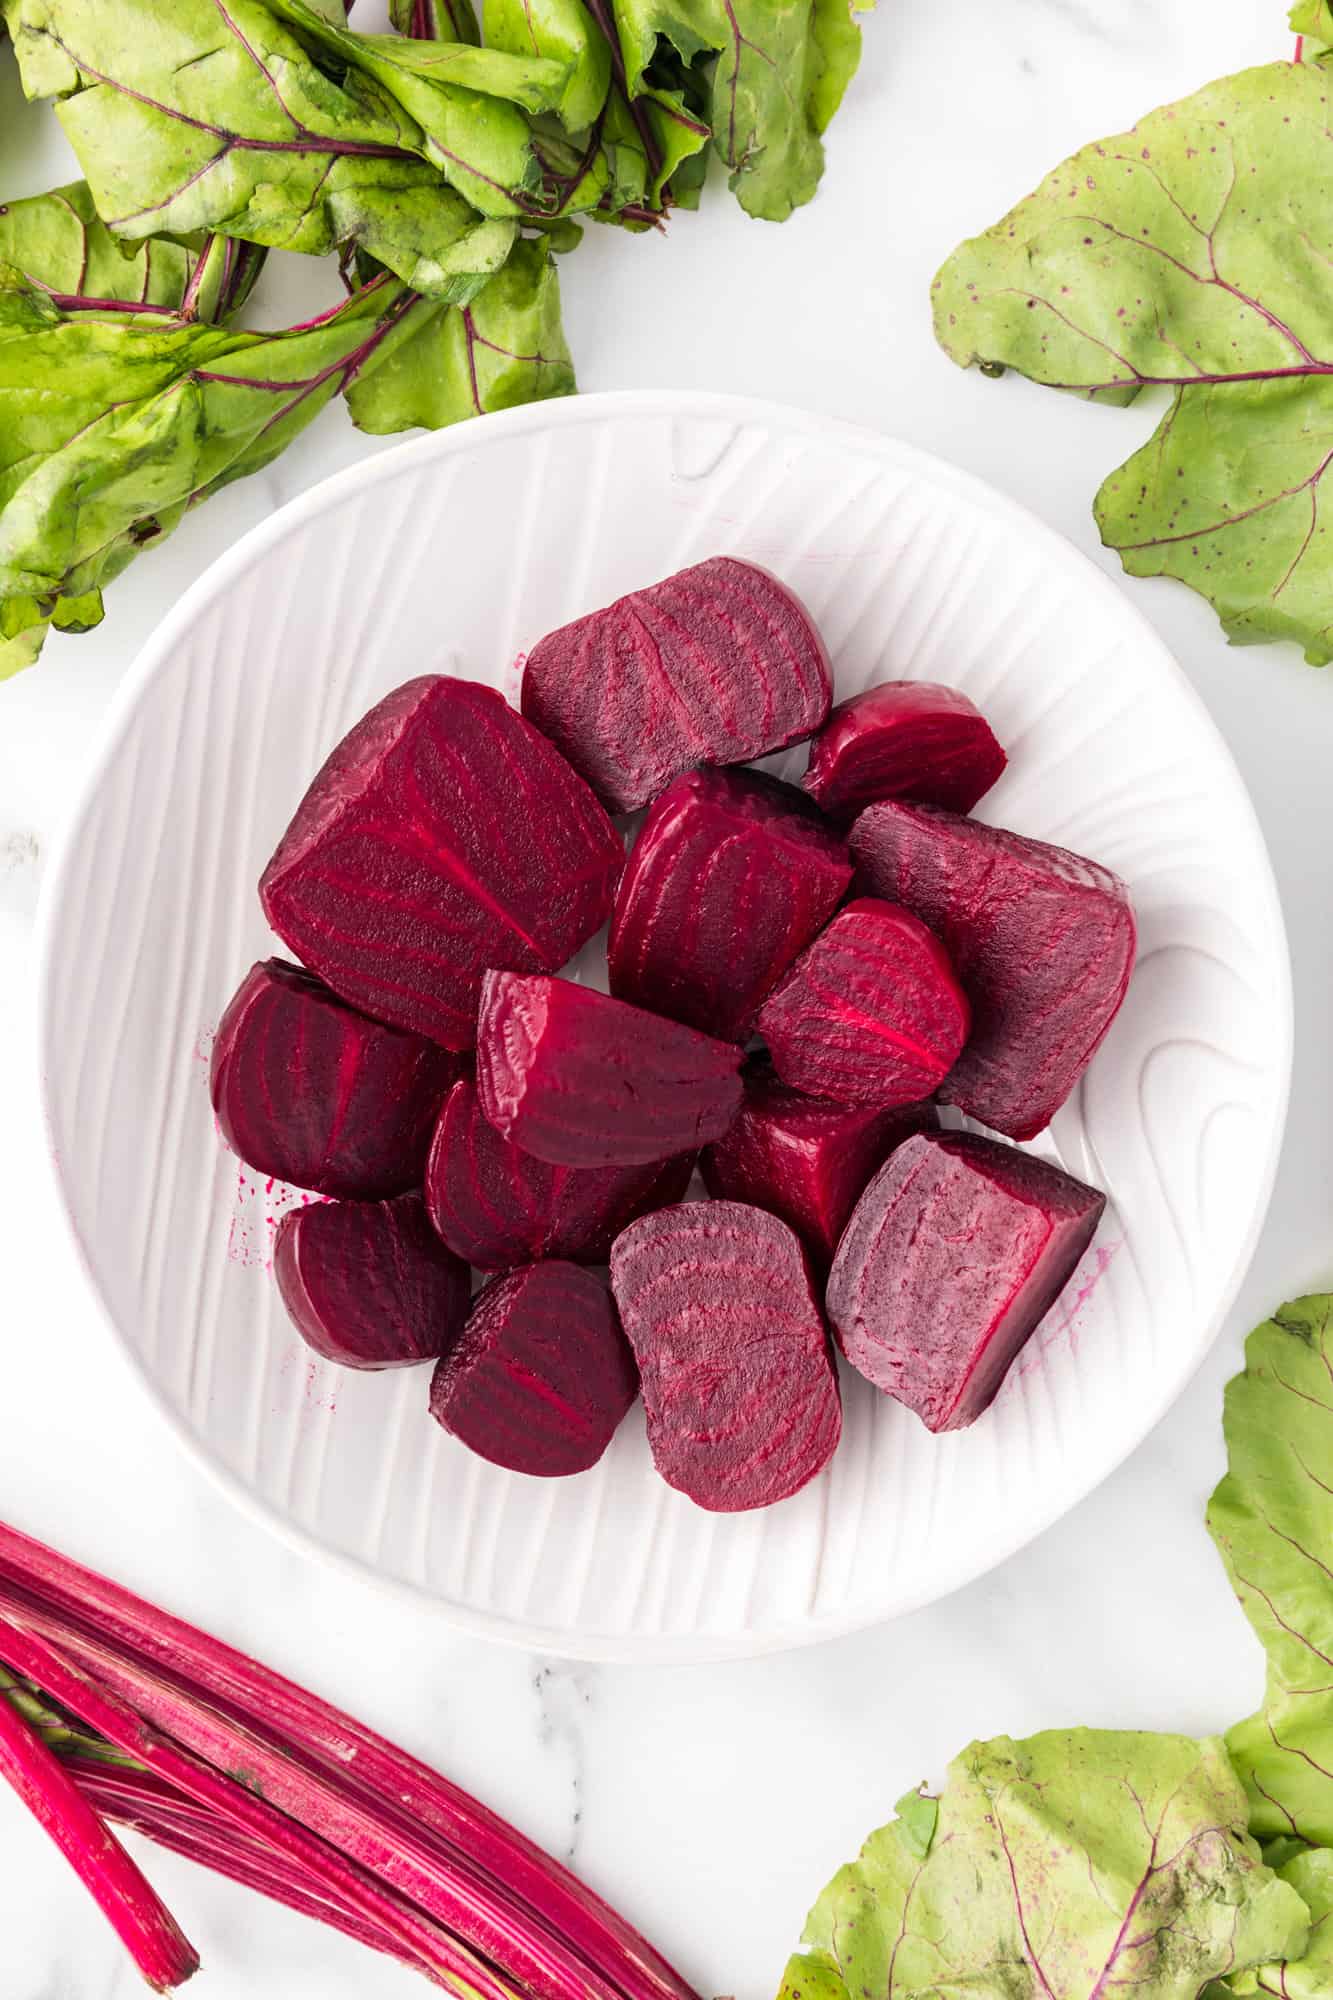 Chopped beets in a white bowl, surrounded by beet greens.